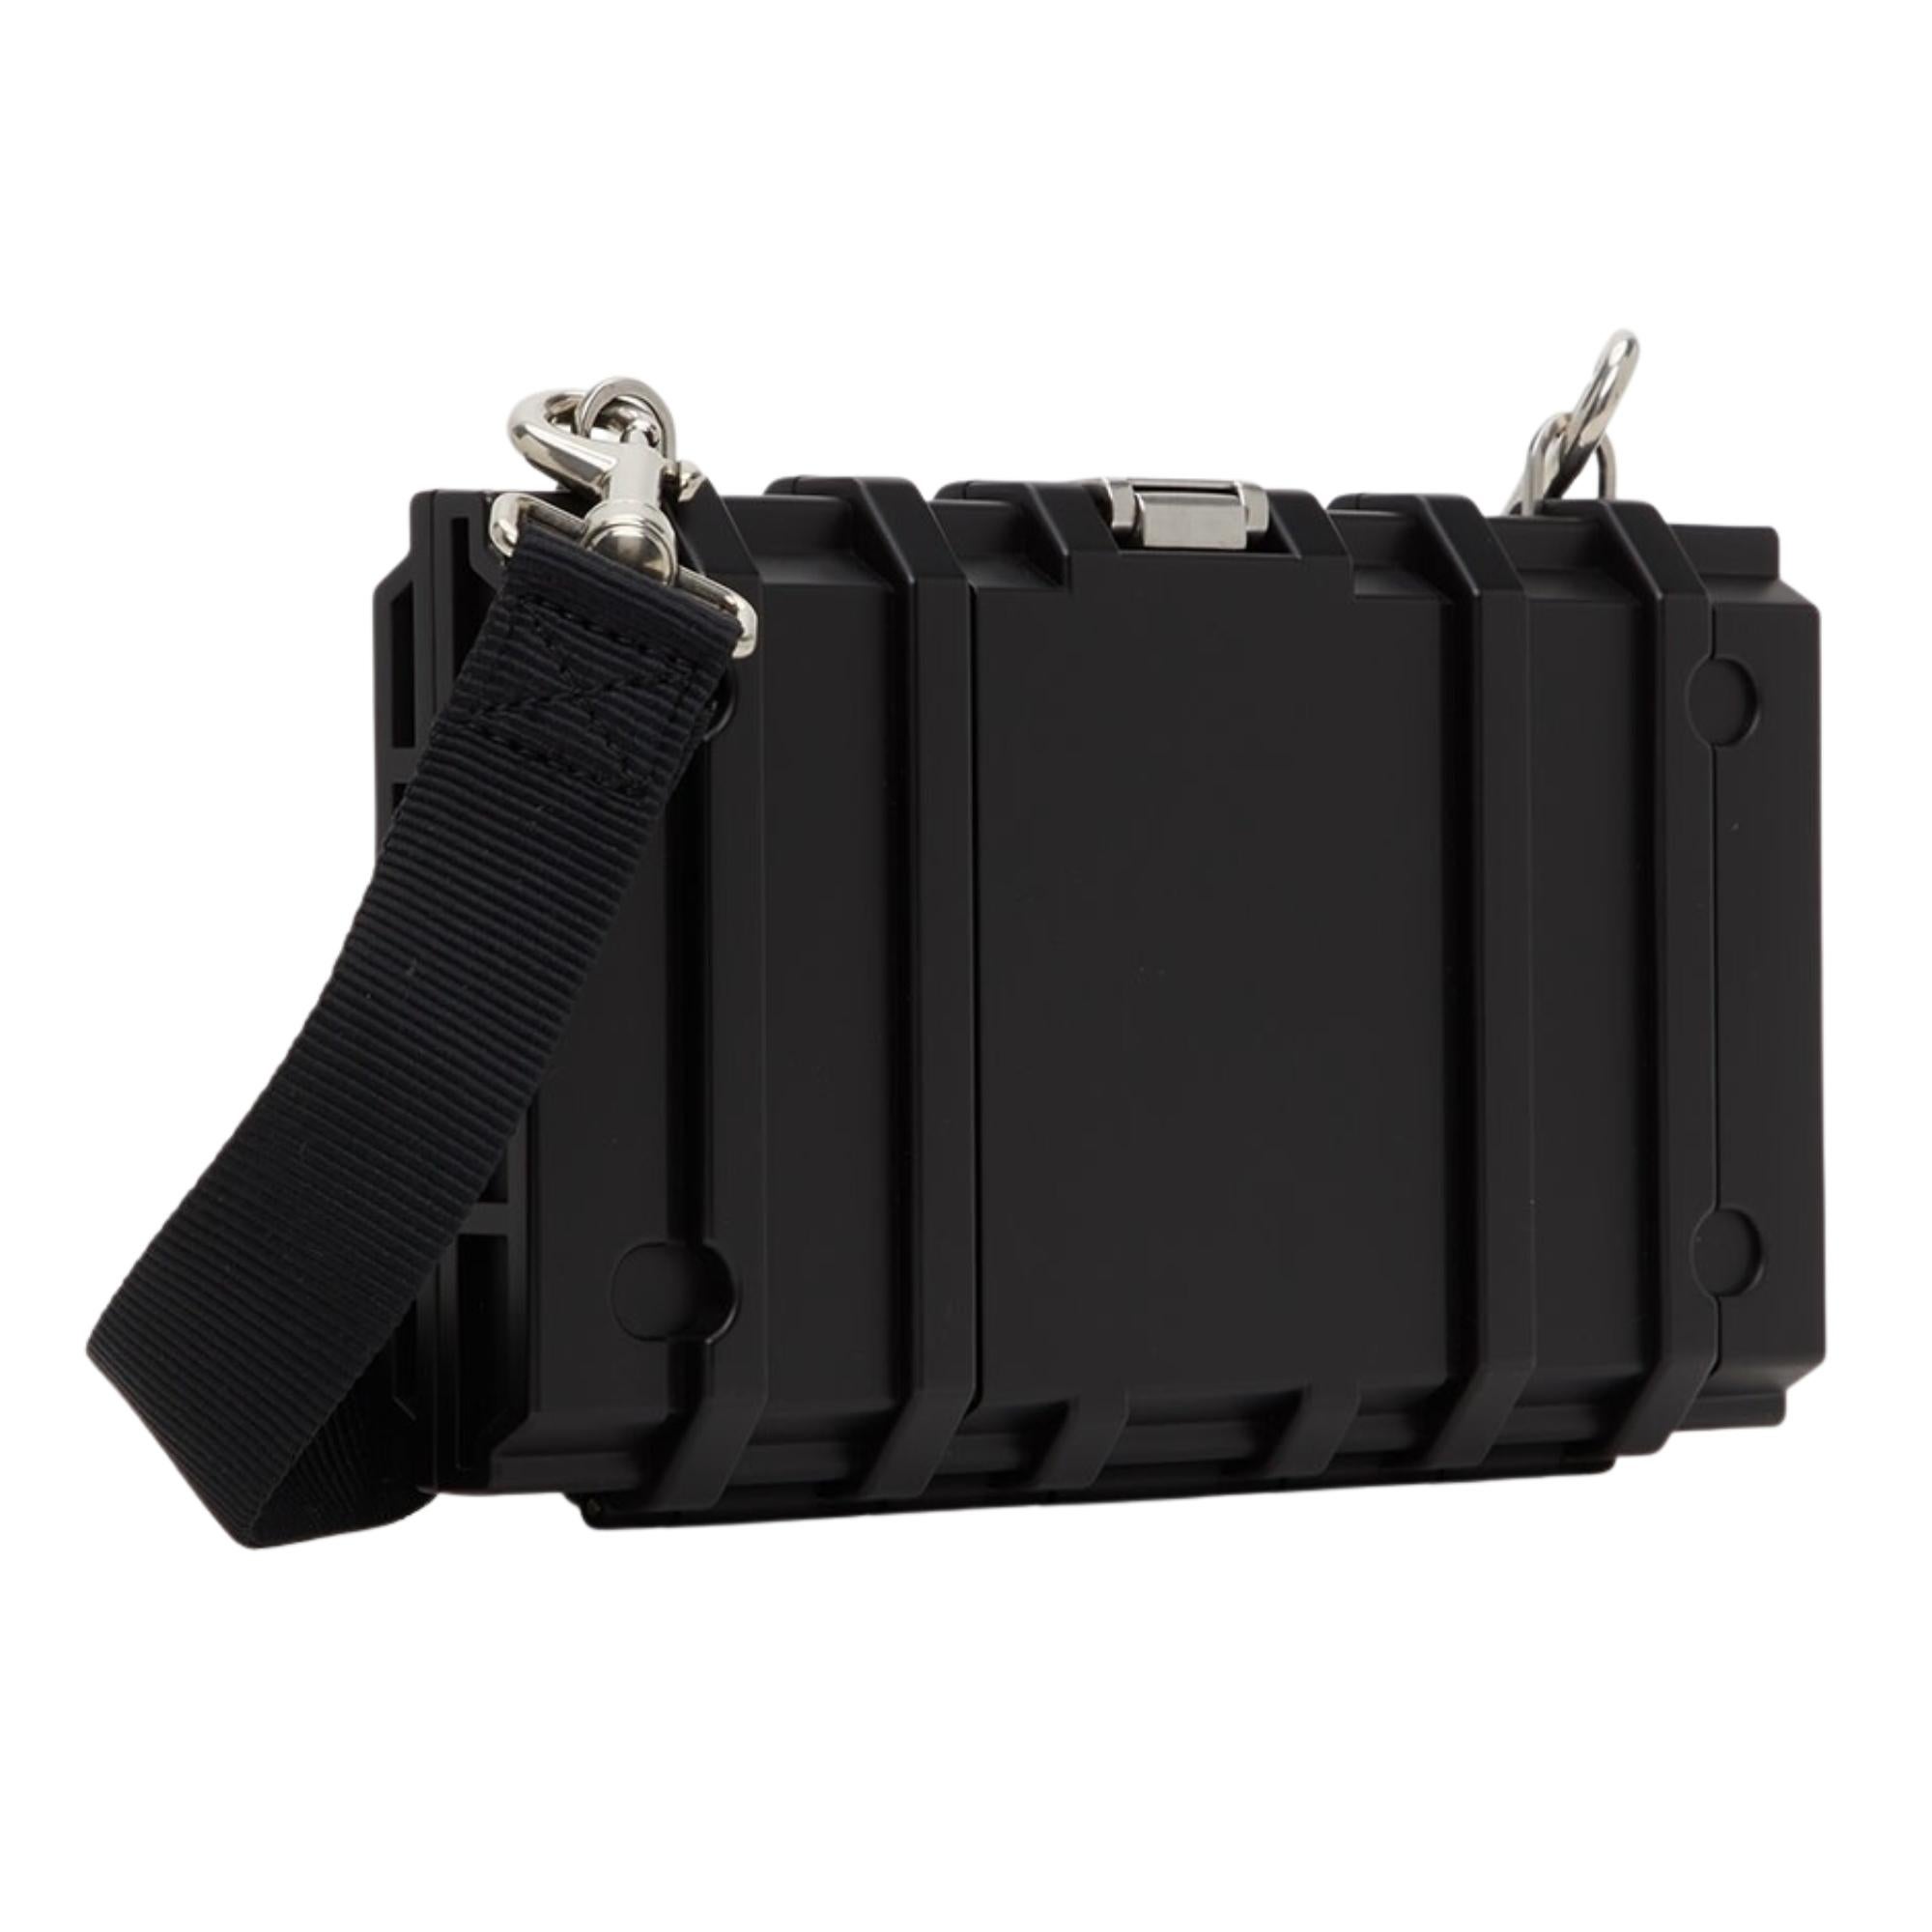 Balenciaga Black Toolbox Clutch Crossbody Bag In Excellent Condition For Sale In Montreal, Quebec